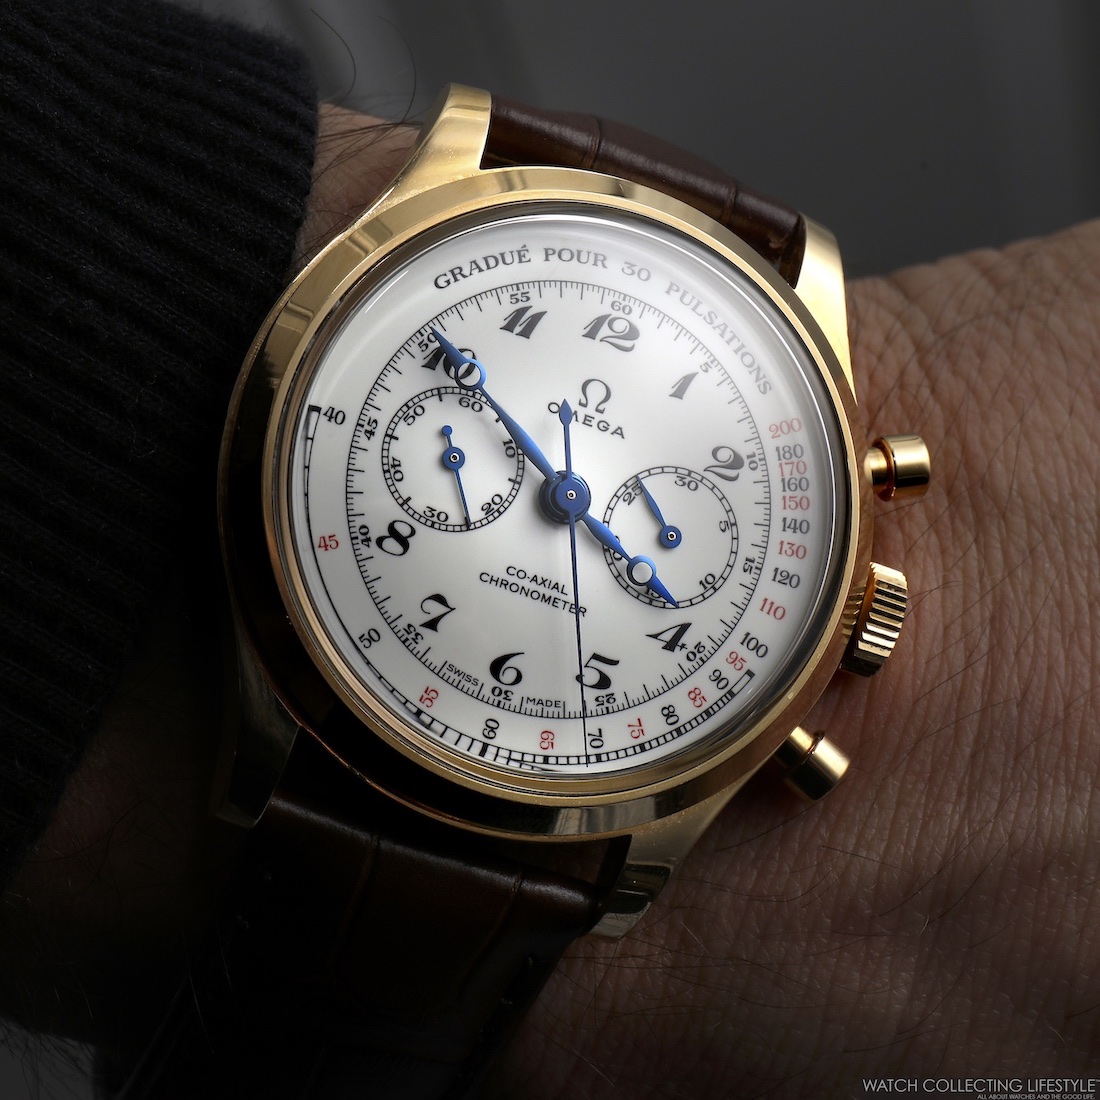 The Watch Collectors: @RJKama. The 